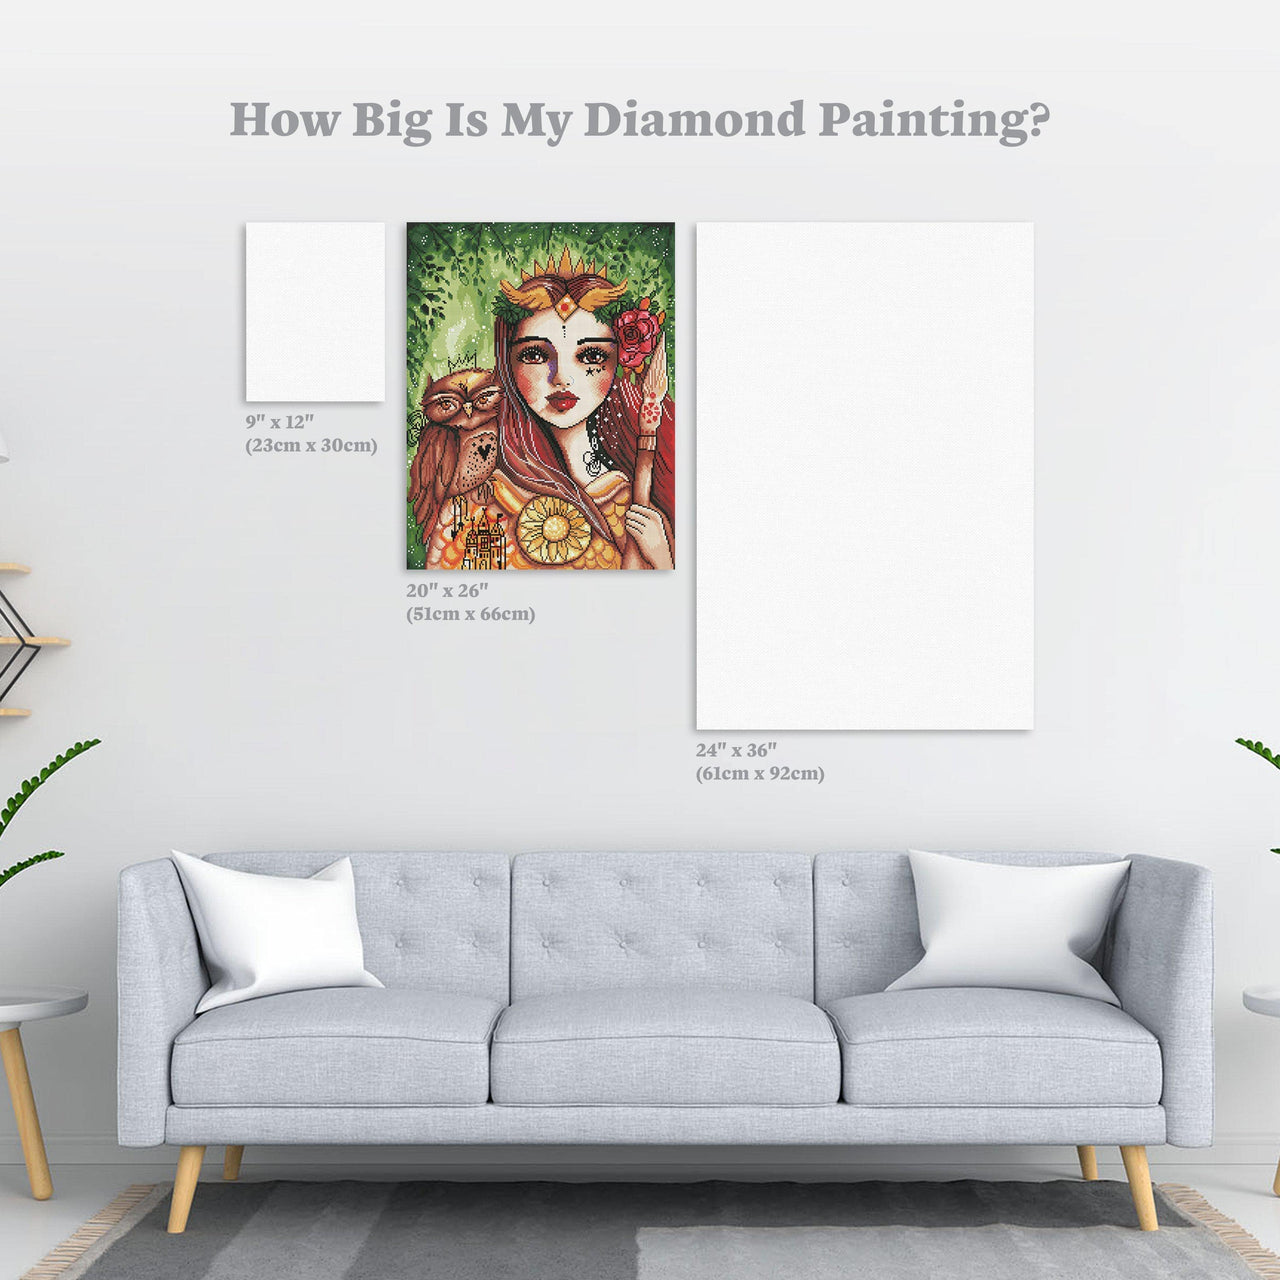 Diamond Painting Athena 20" x 26″ (51cm x 66cm) / Round with 43 Colors including 2 ABs / 42,534